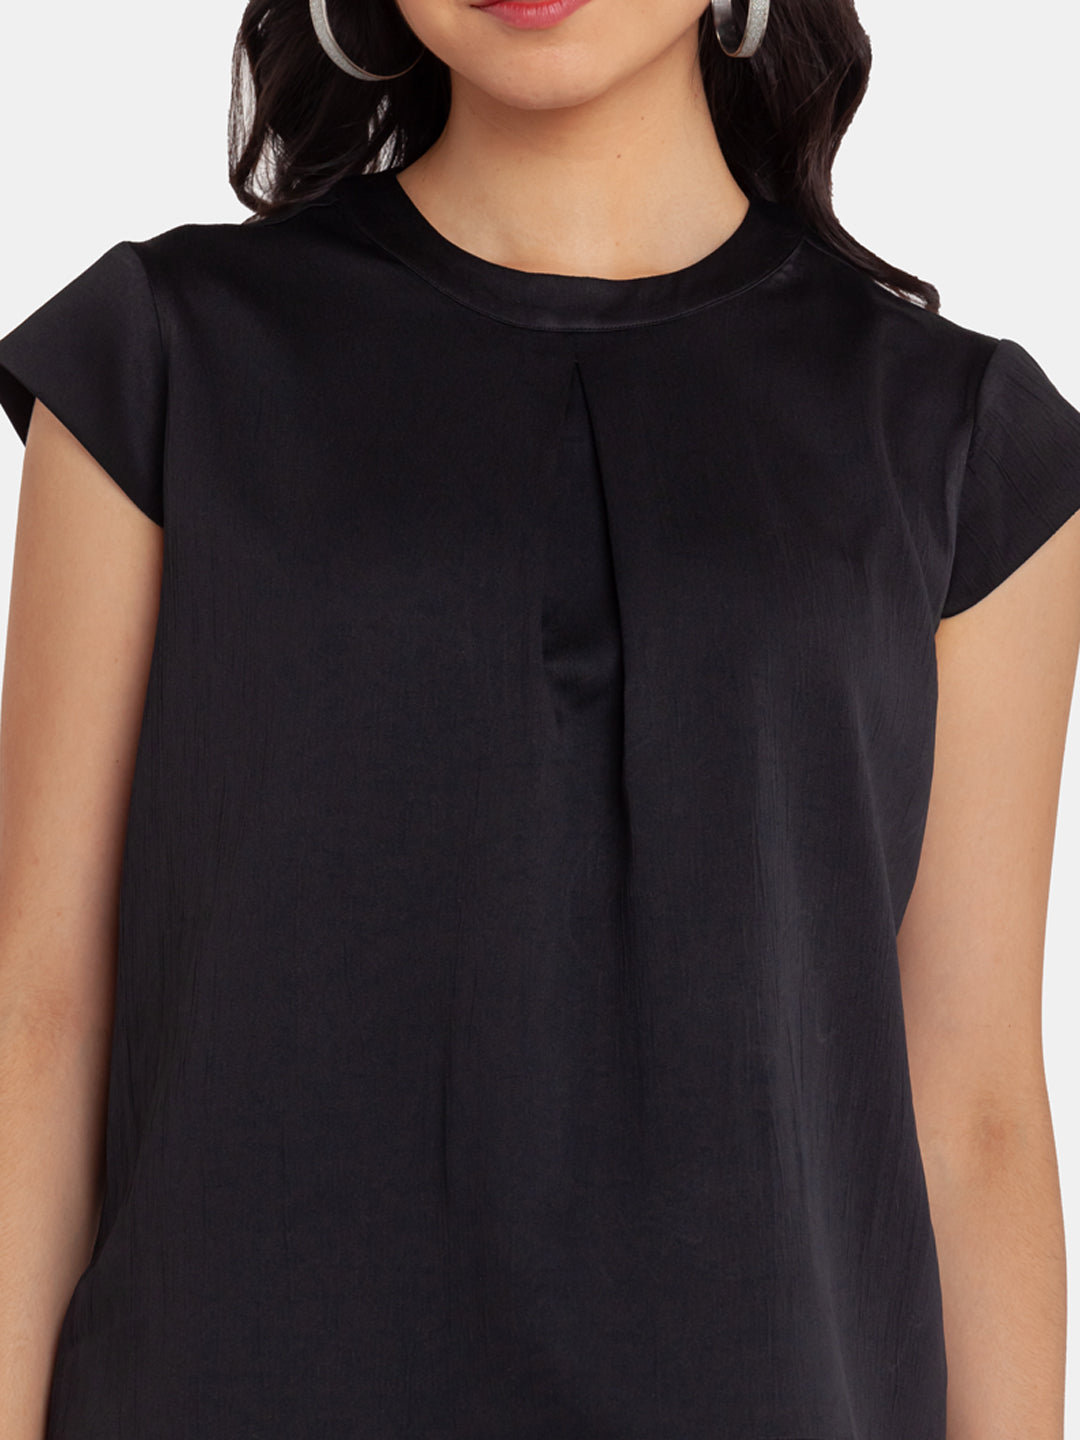 Black Solid Pleated Top For Women